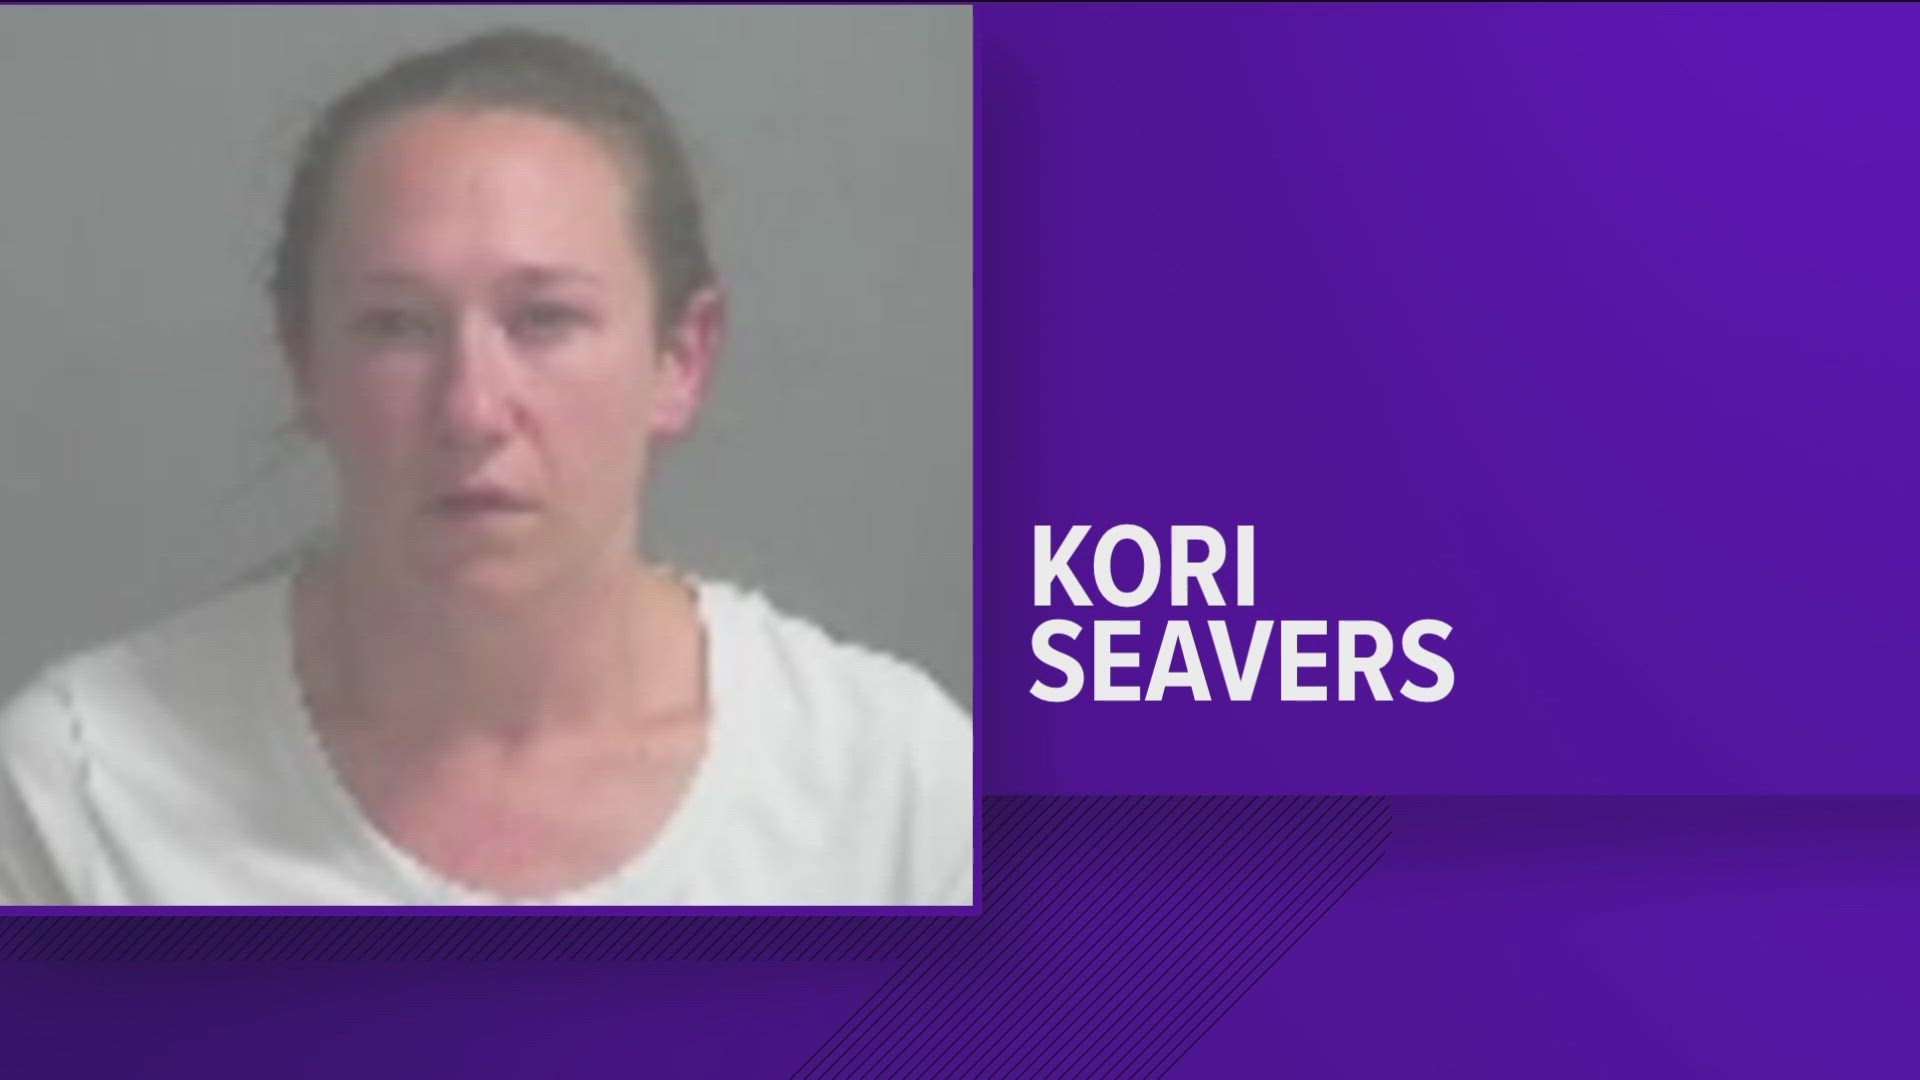 Kori Seavers, 38, is accused of causing 'non-accidental trauma' to toddler William Bova, leading to his death in 2022.